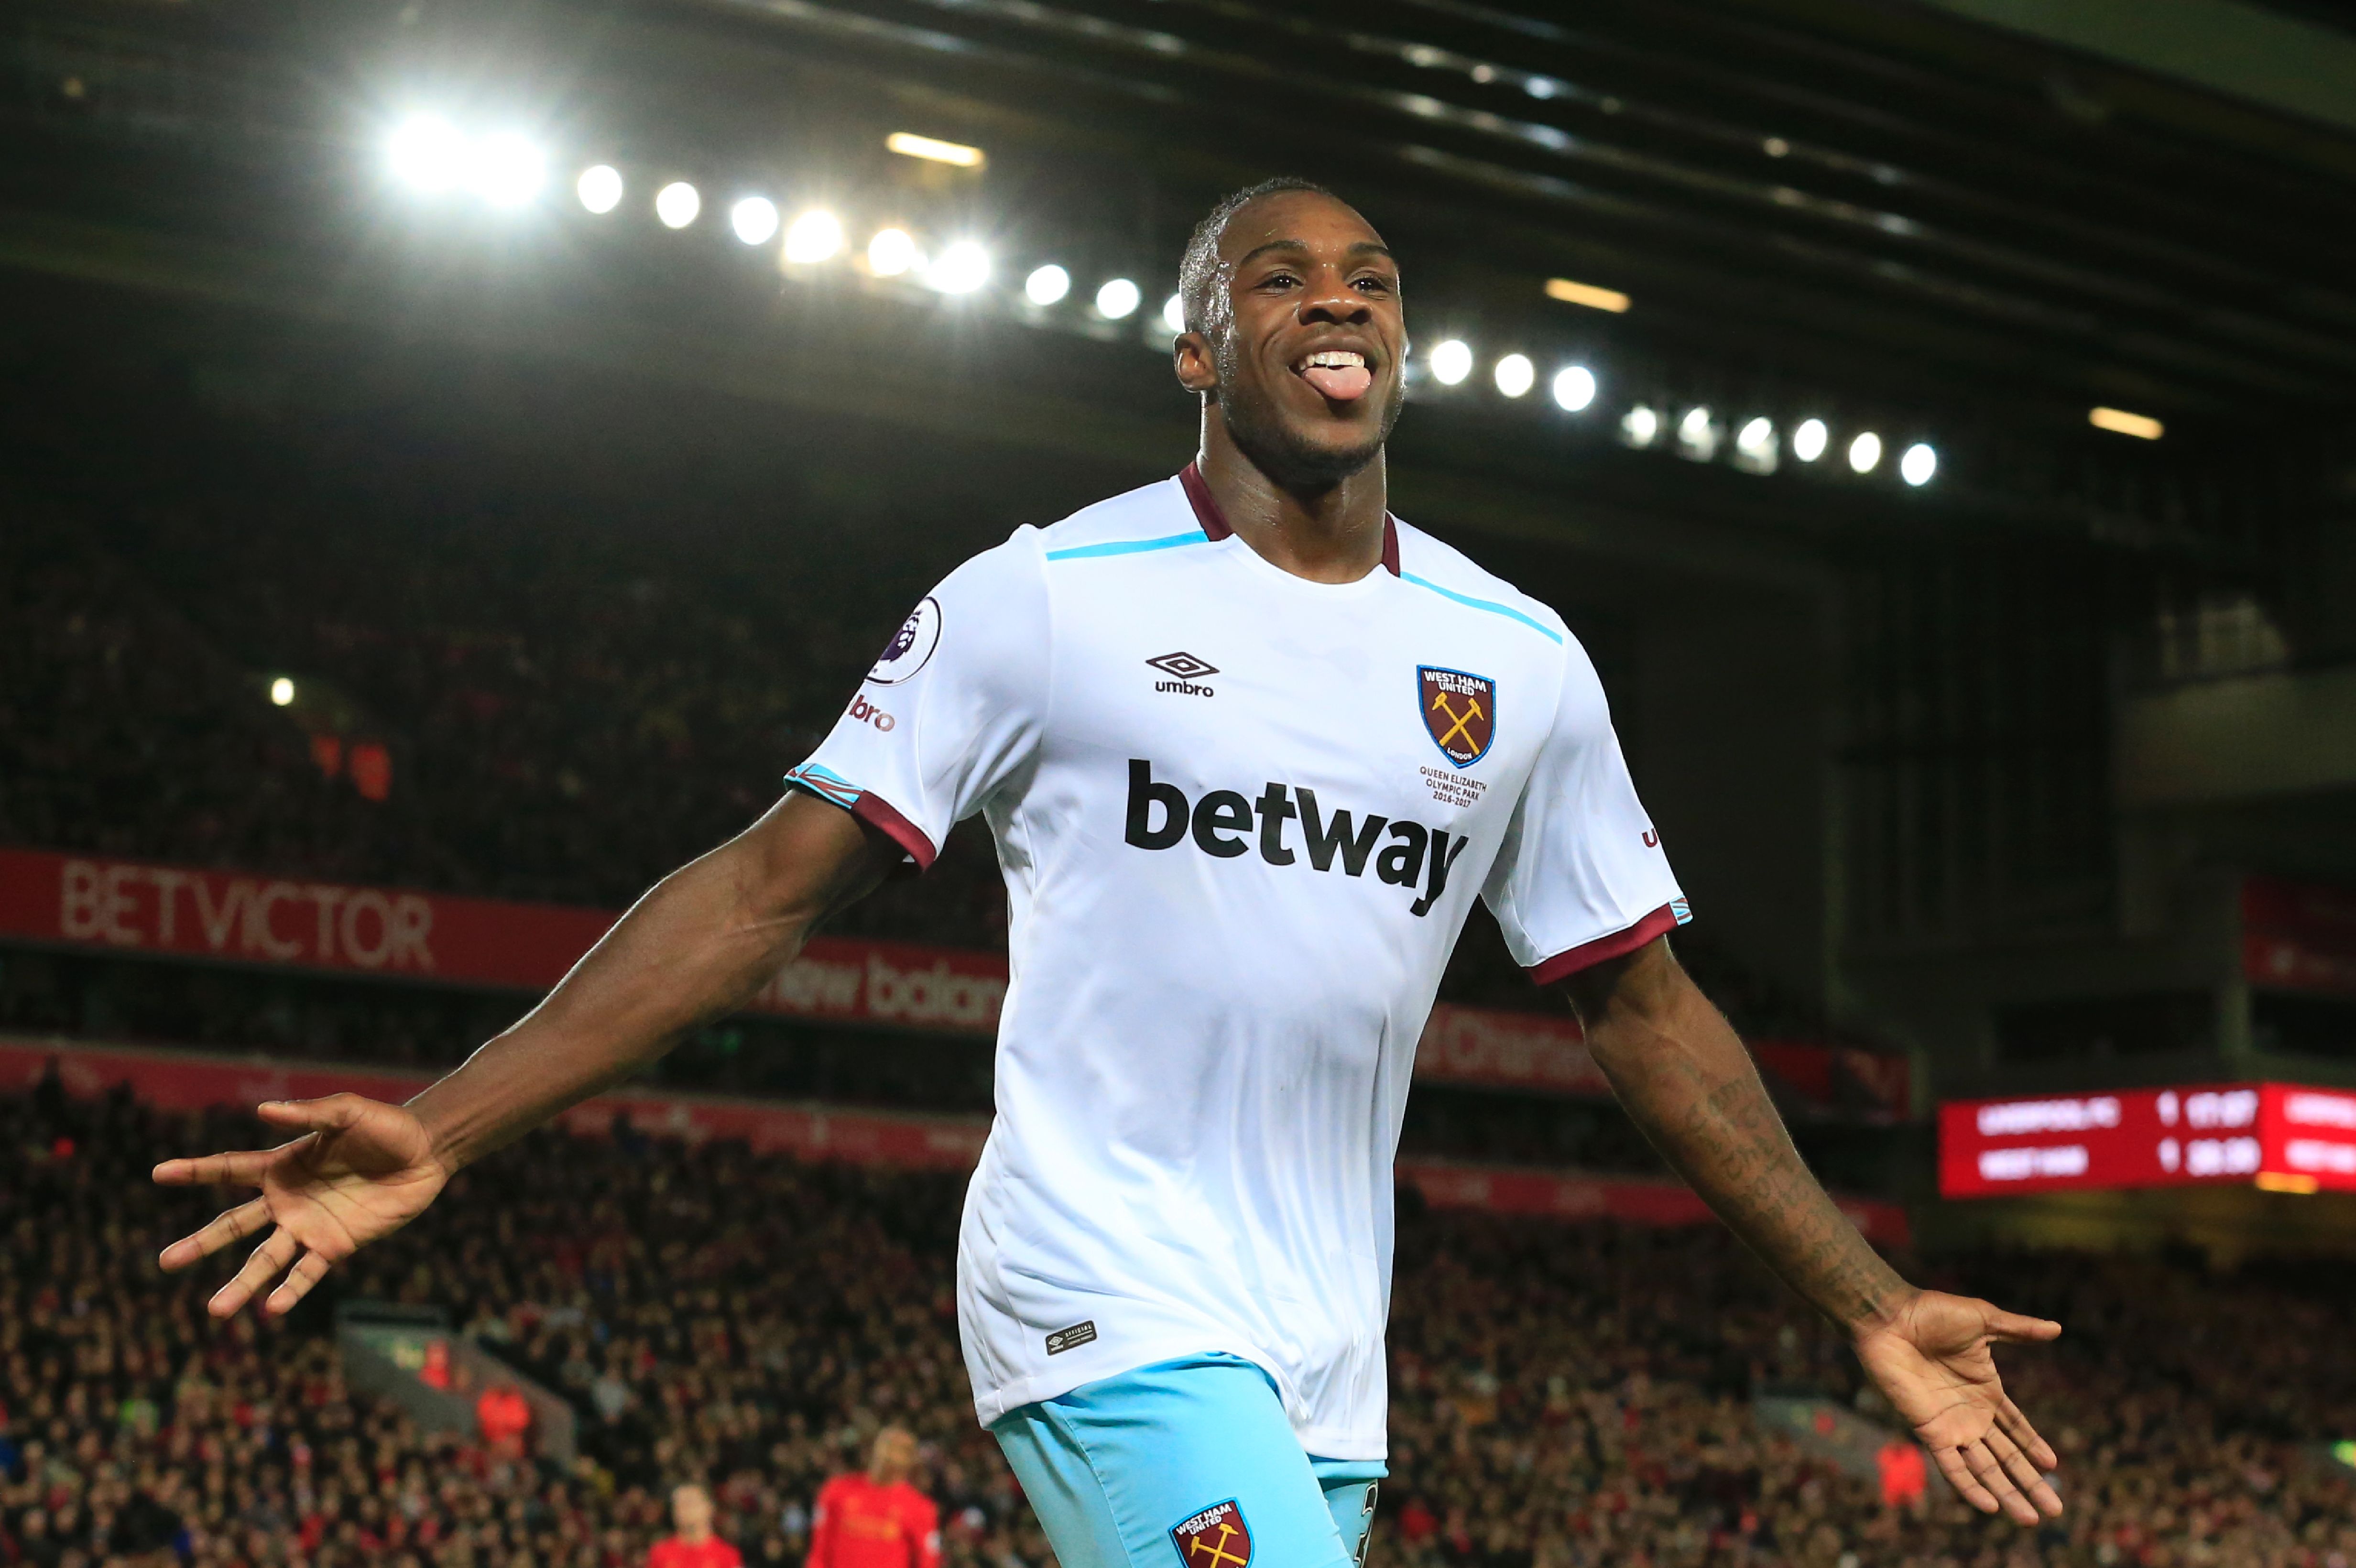 West Ham United's English midfielder Michail Antonio celebrates scoring their second goal during the English Premier League football match between Liverpool and West Ham United at Anfield in Liverpool, north west England on December 11, 2016. / AFP / Lindsey PARNABY / RESTRICTED TO EDITORIAL USE. No use with unauthorized audio, video, data, fixture lists, club/league logos or 'live' services. Online in-match use limited to 75 images, no video emulation. No use in betting, games or single club/league/player publications.  /         (Photo credit should read LINDSEY PARNABY/AFP/Getty Images)